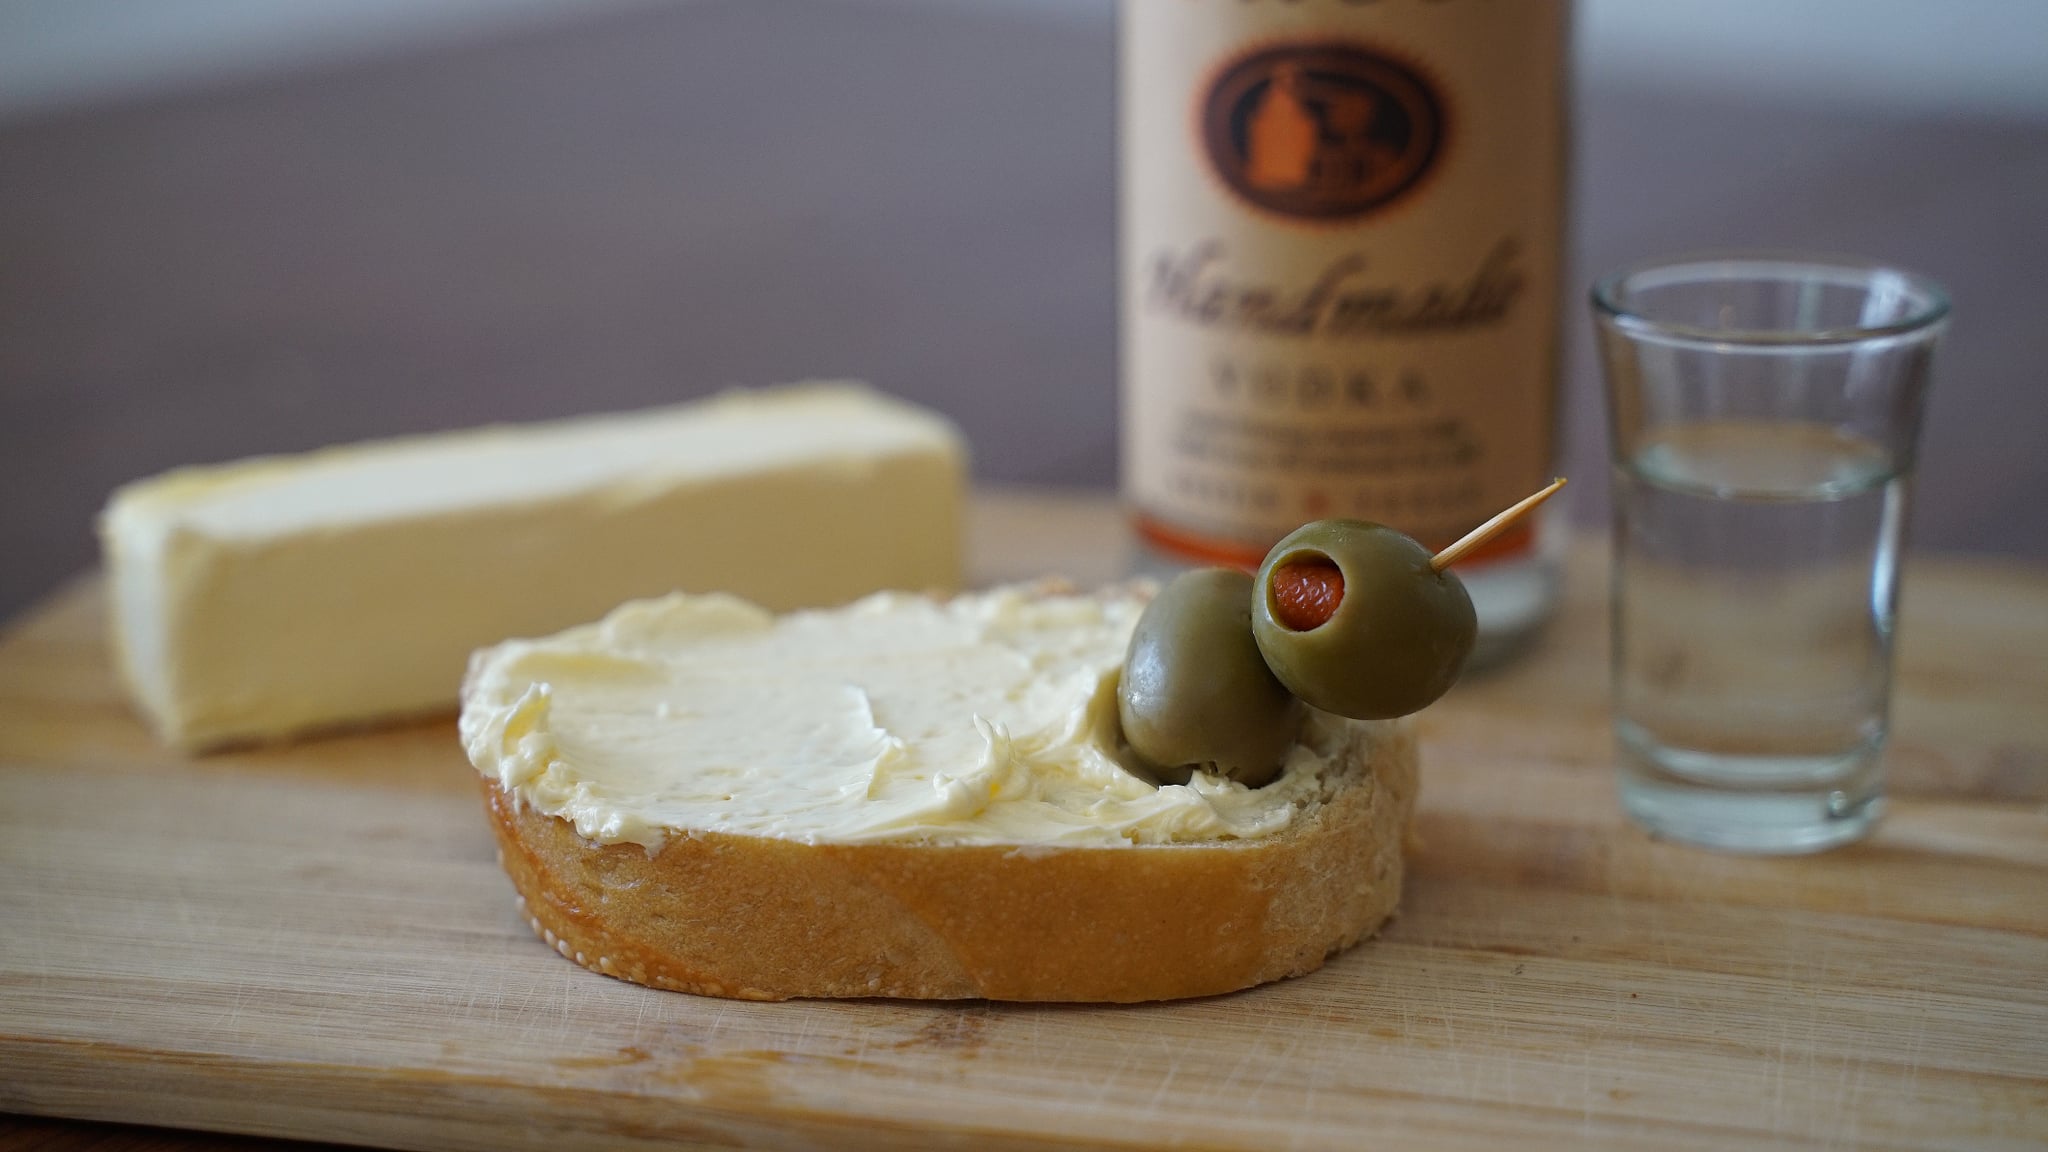 vodka butter on bread with olives